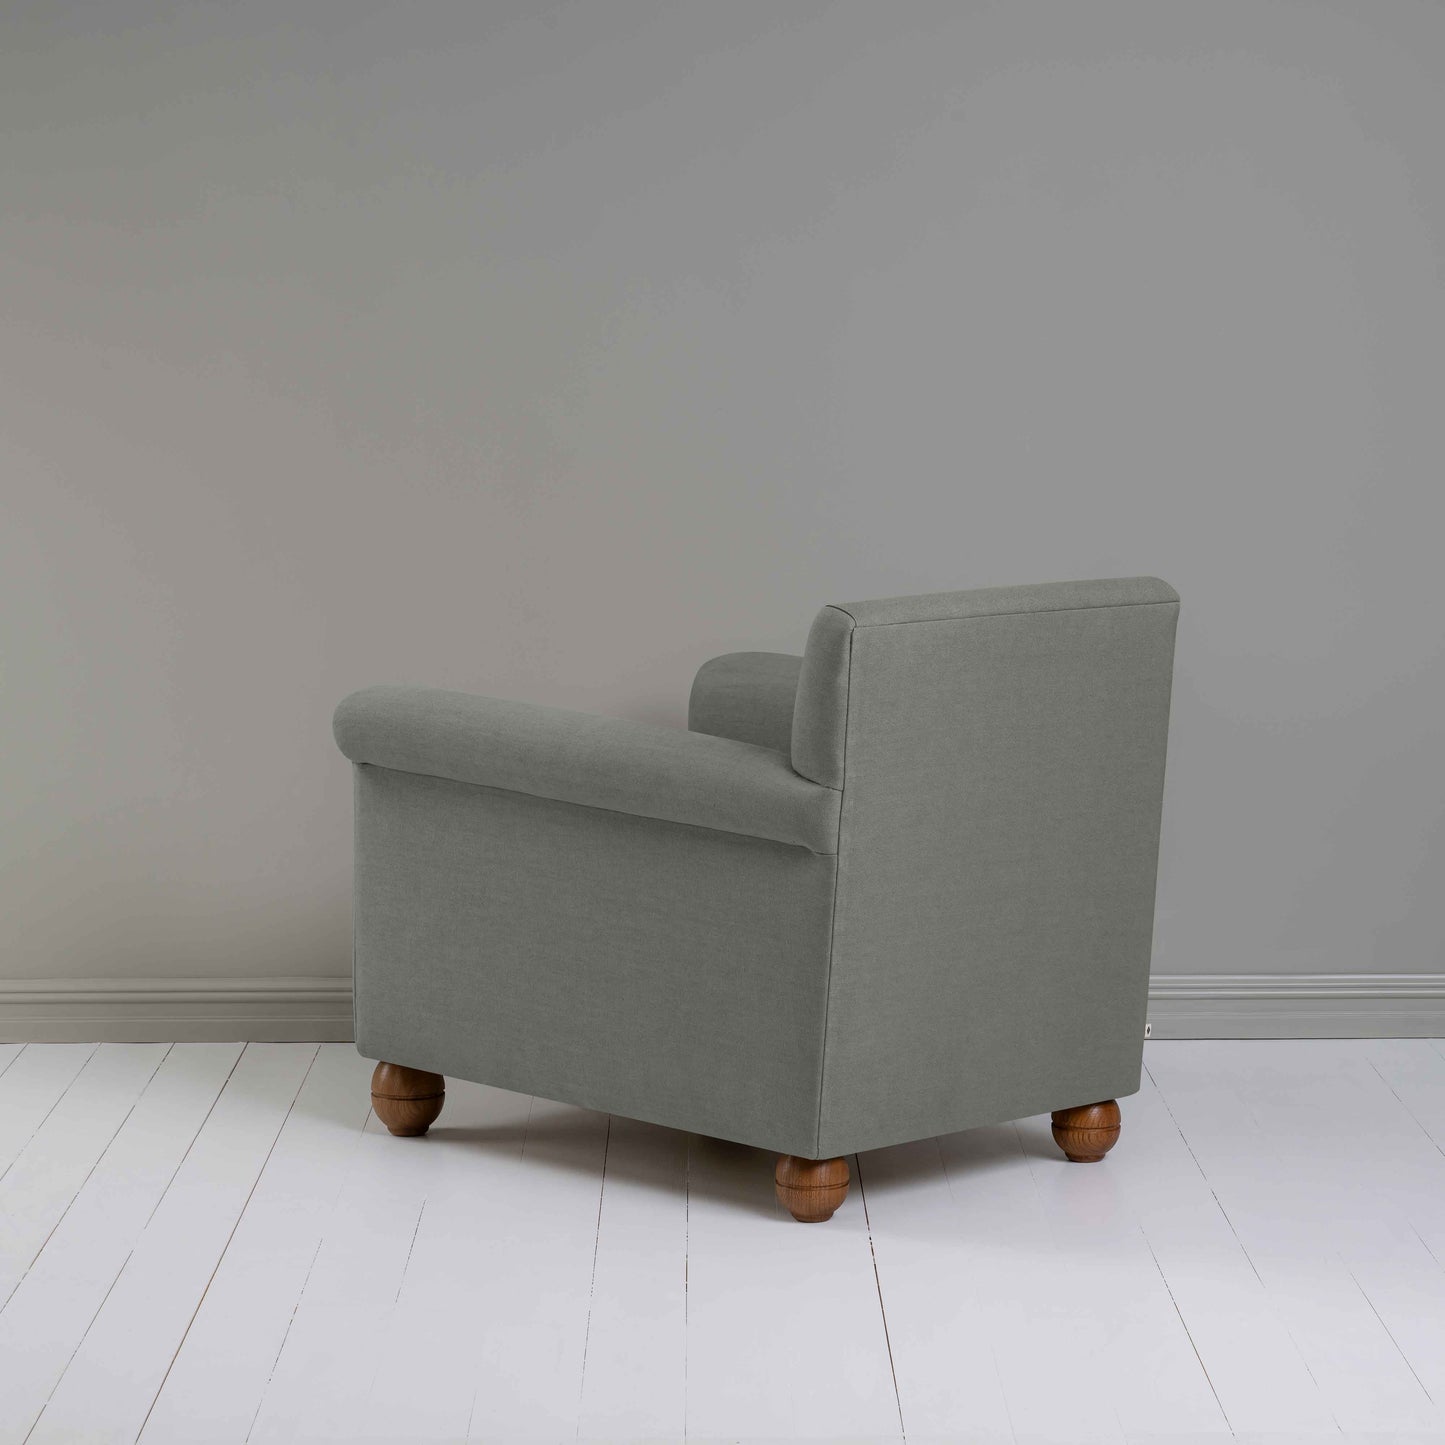 Idler Armchair in Laidback Linen Shadow